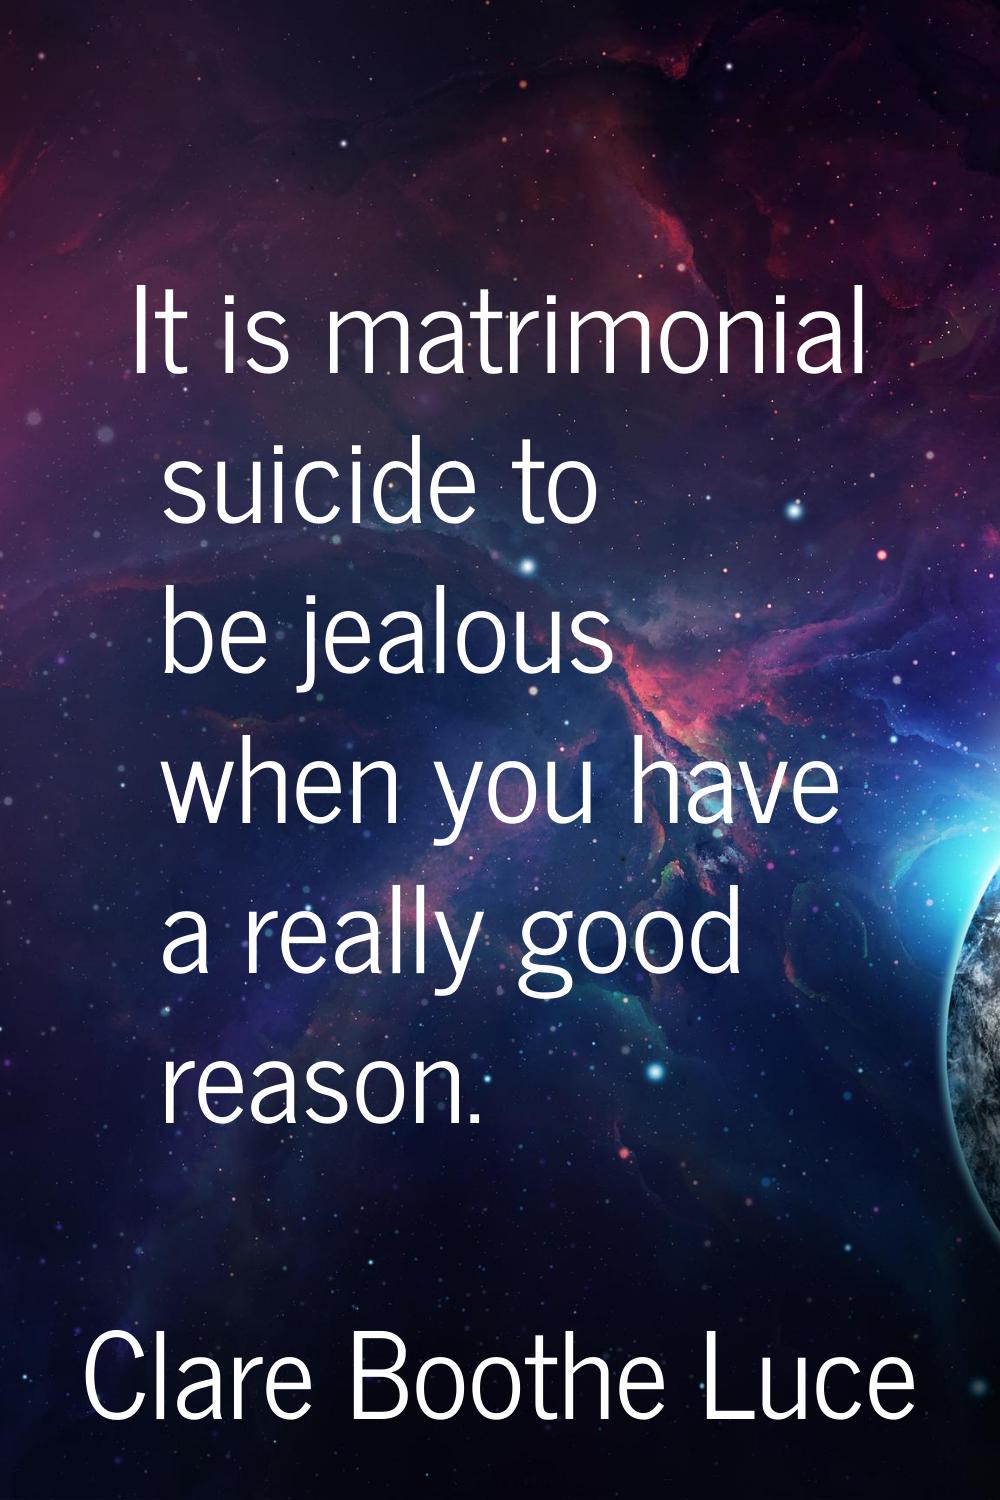 It is matrimonial suicide to be jealous when you have a really good reason.